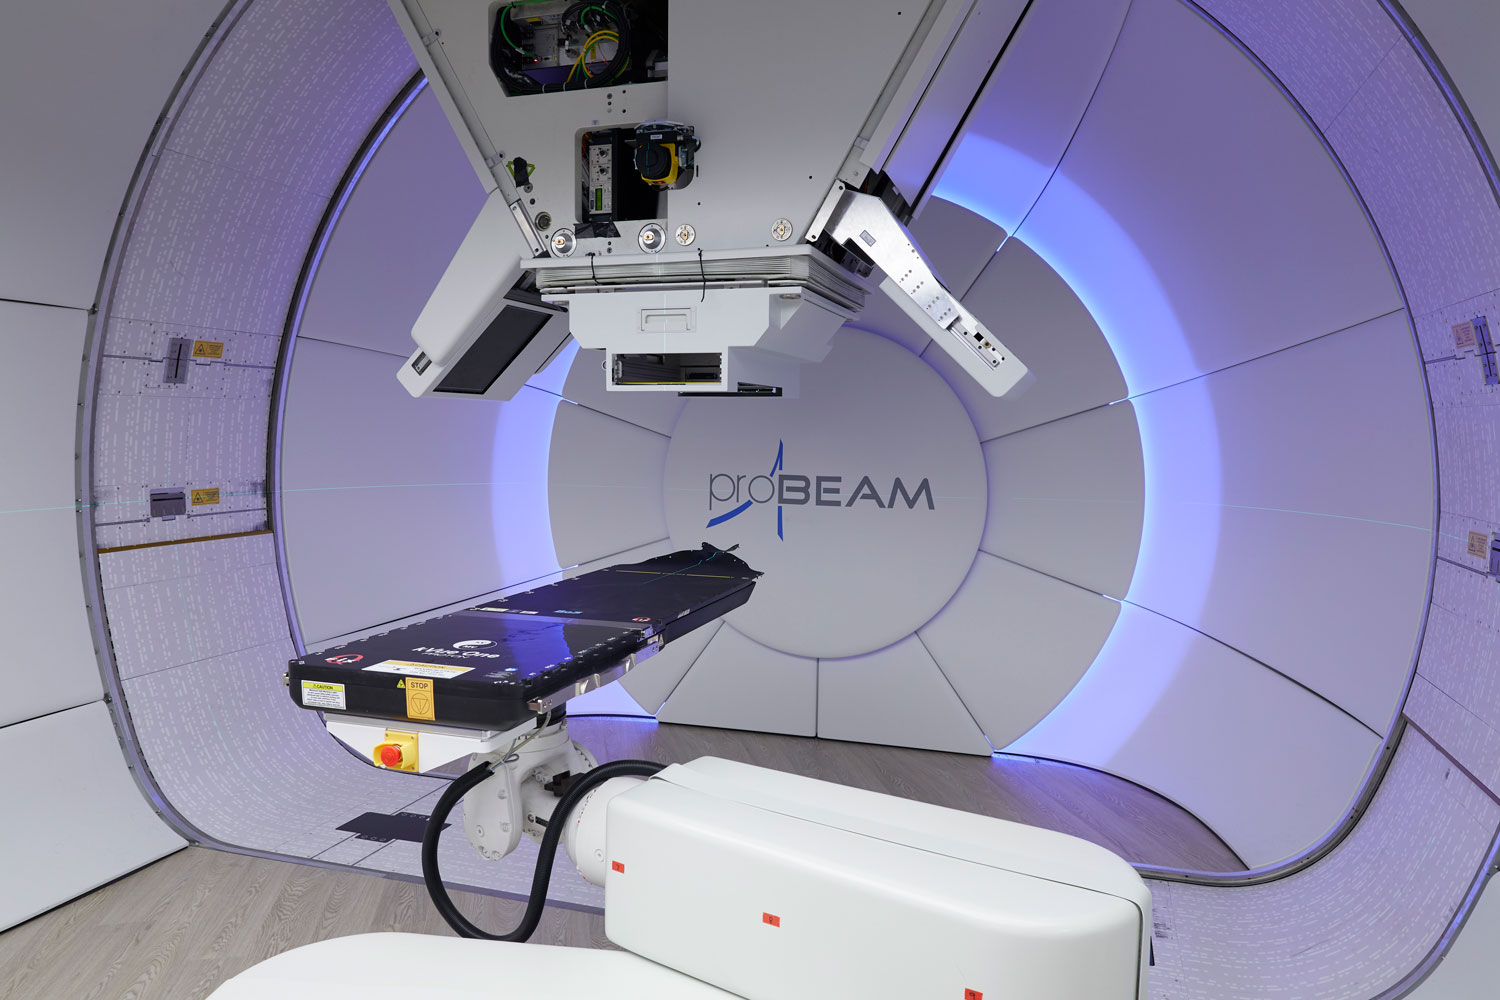 A cancer therapy machine